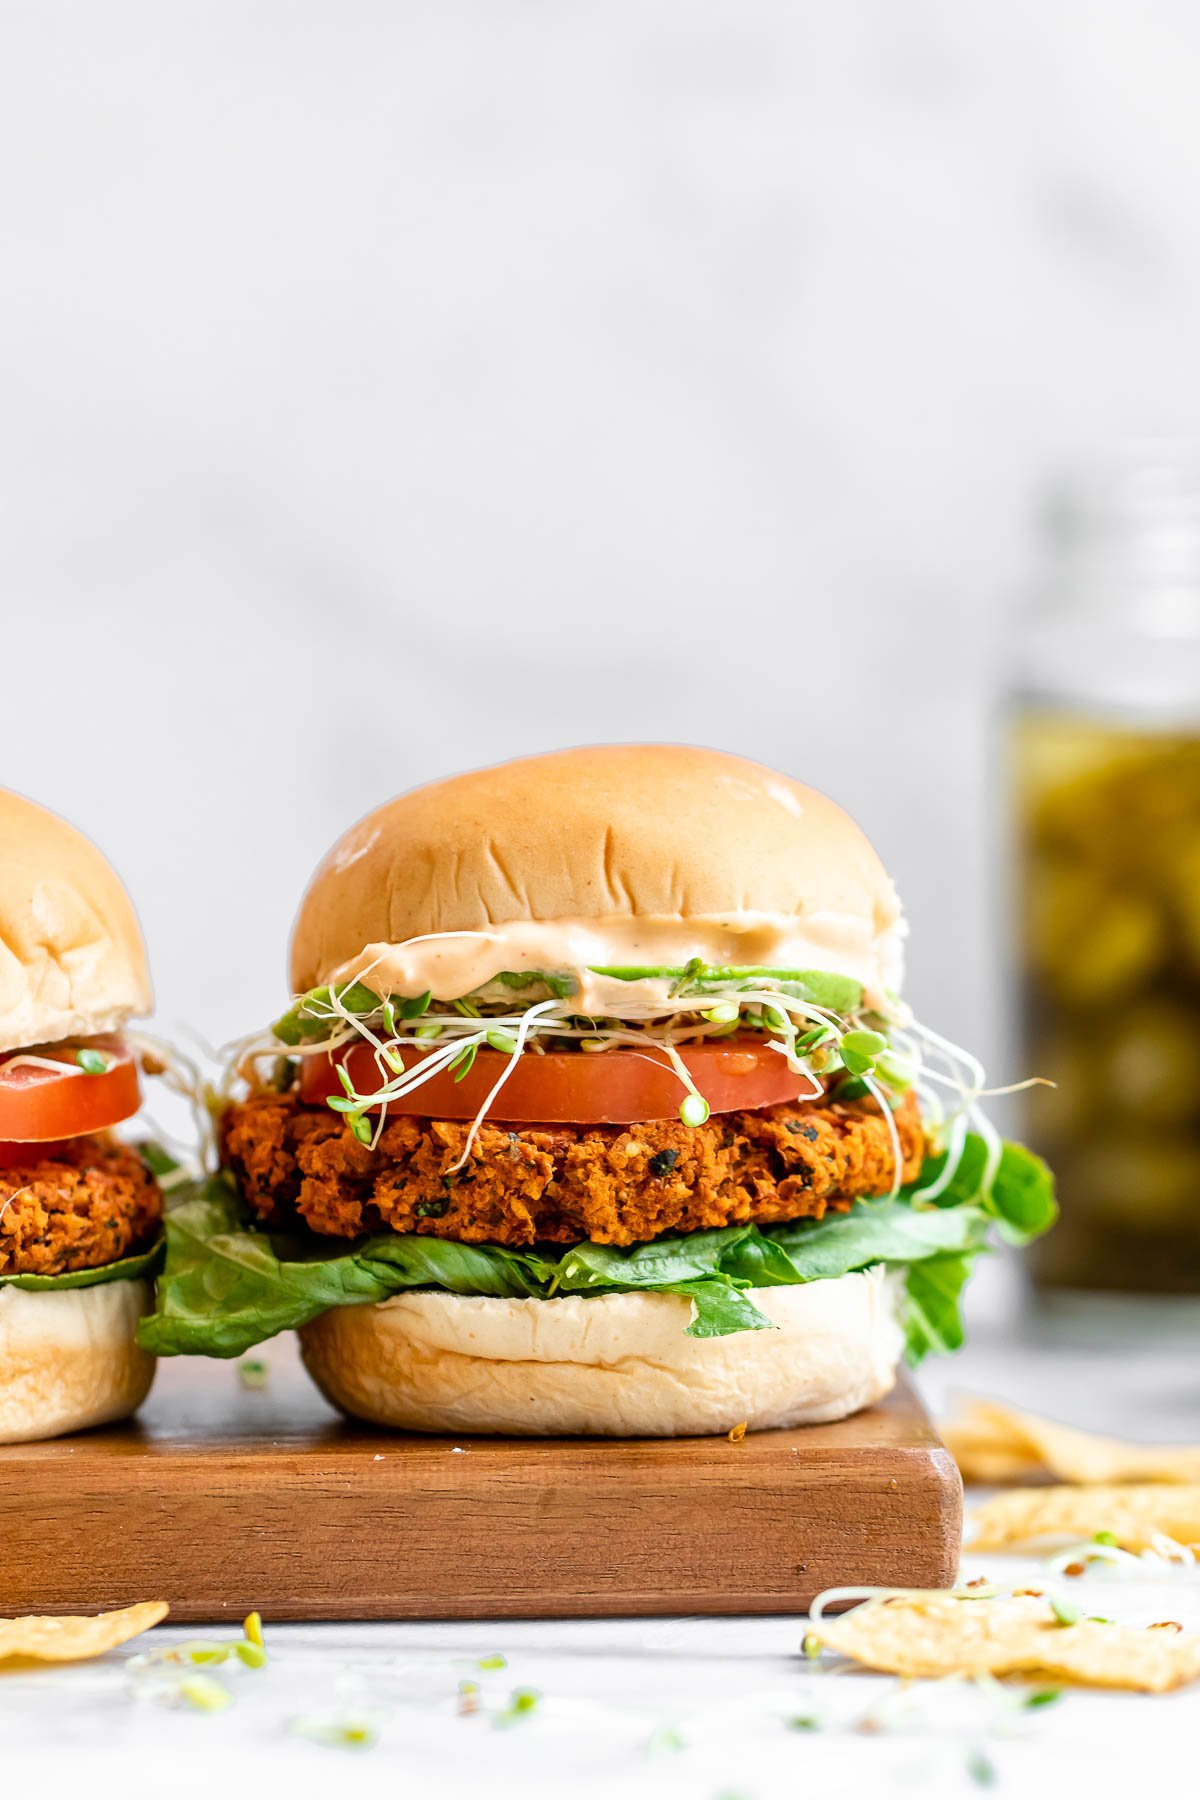 Chickpea burger with lettuce, tomato and tahini dressing.